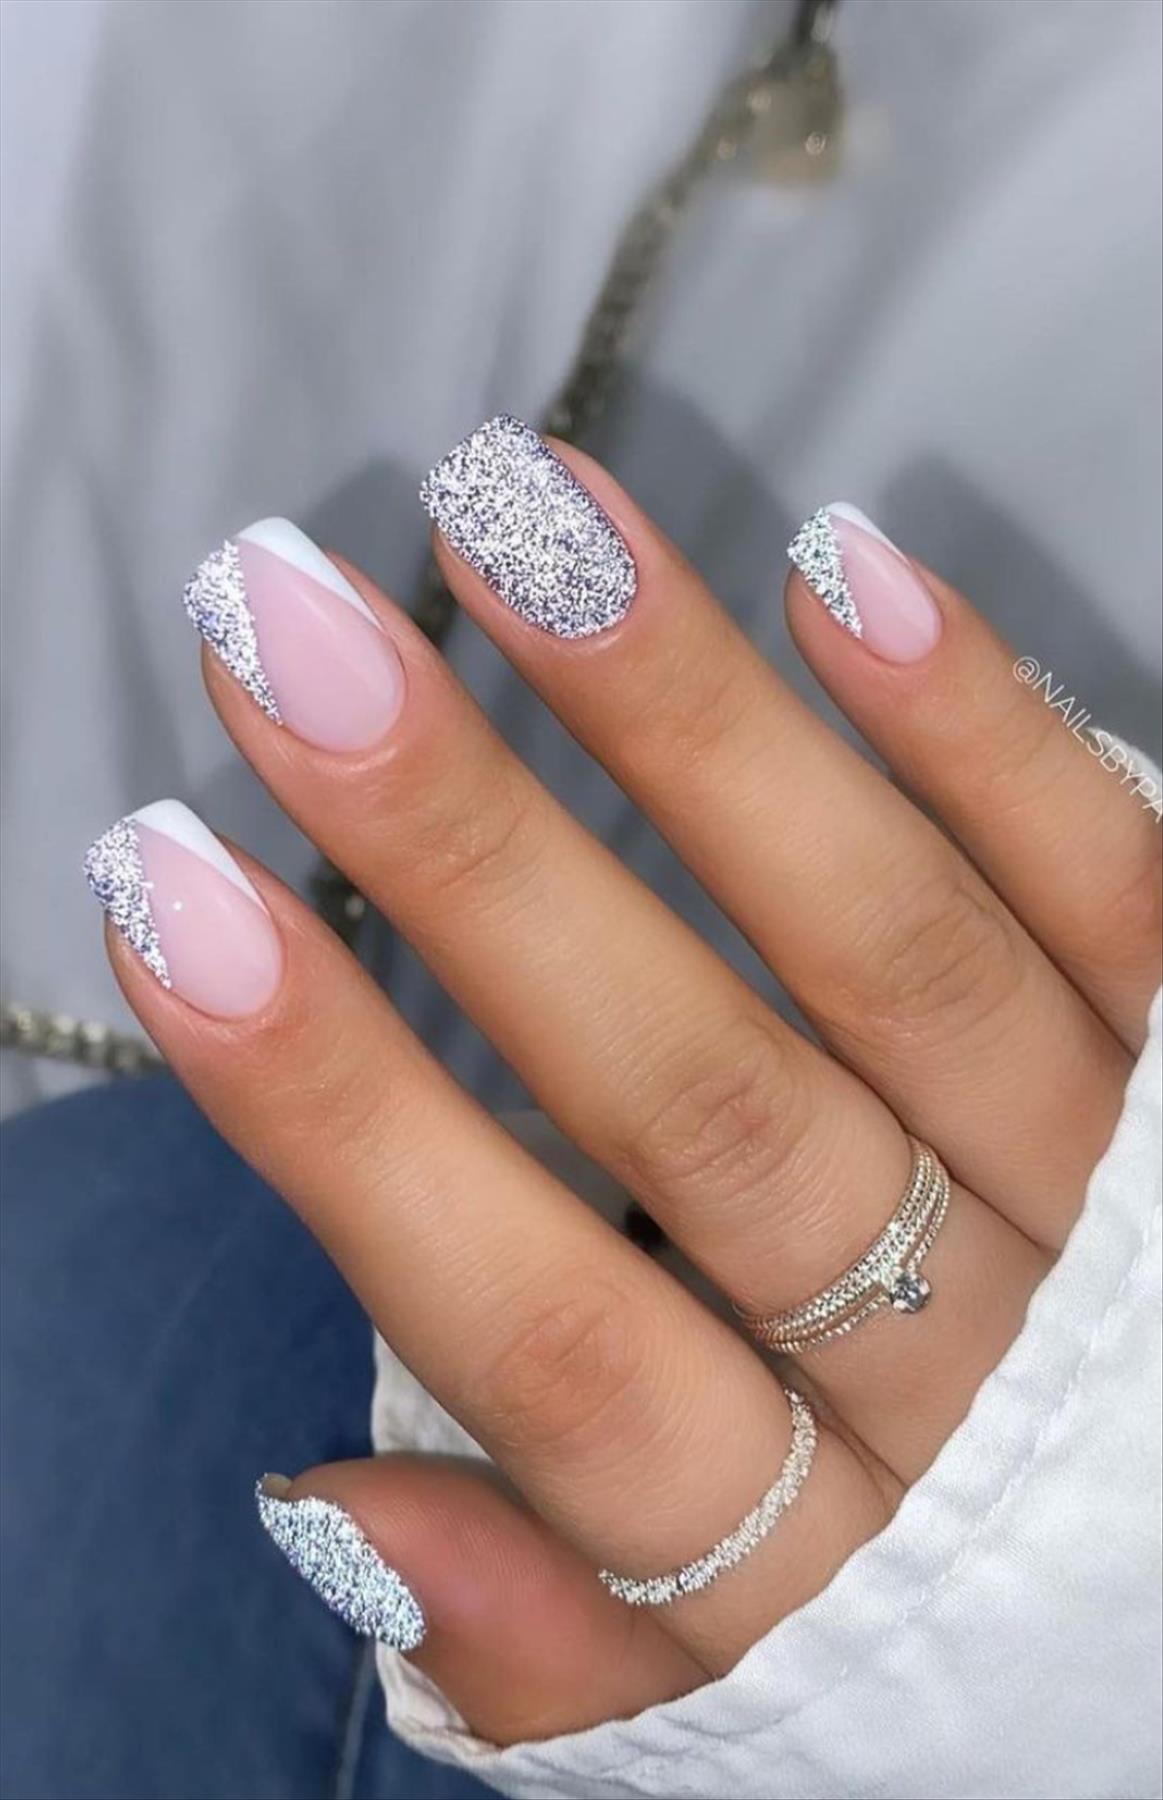 Glitter foil nails with short square nail shapes